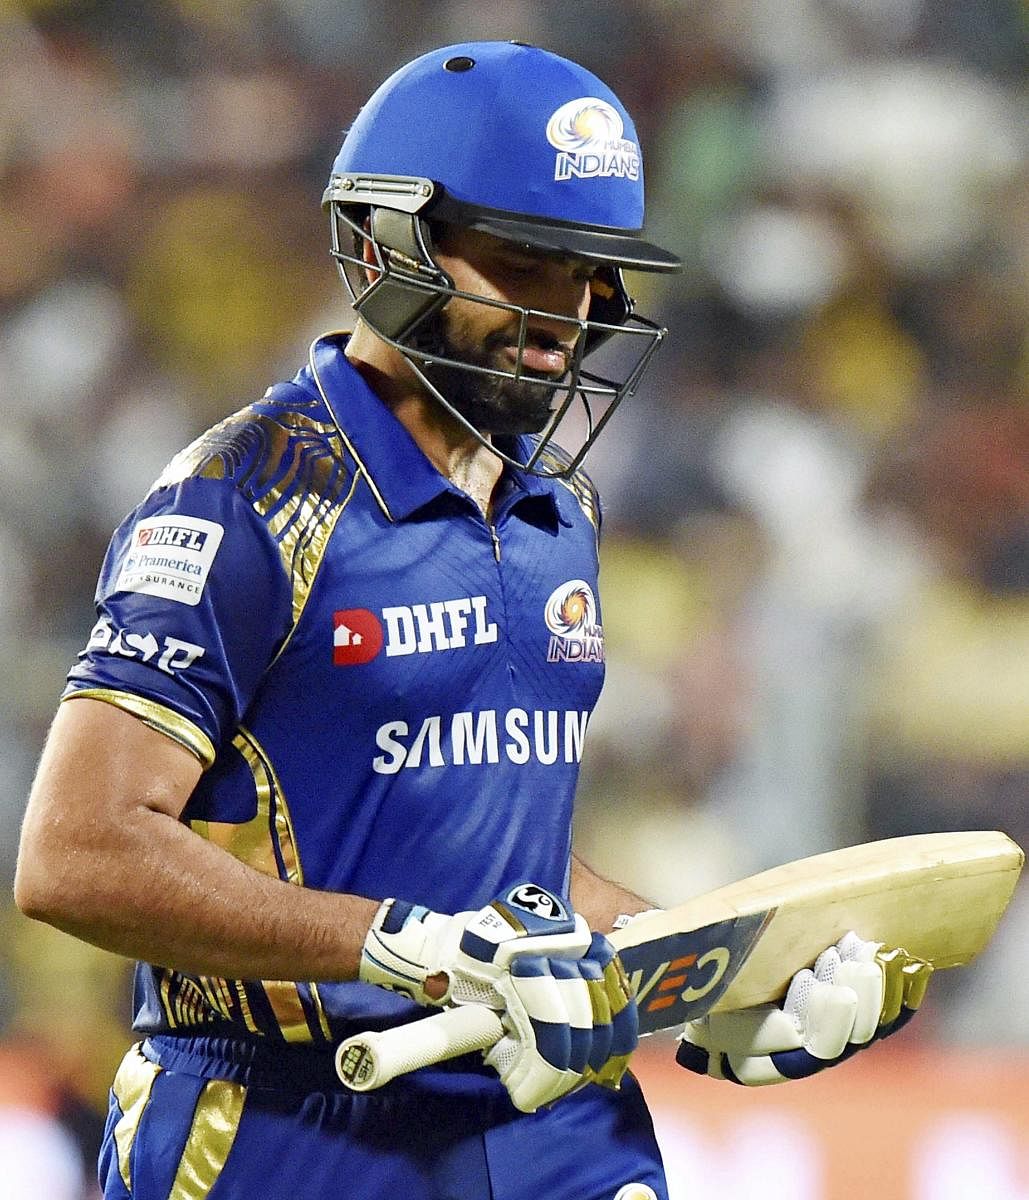 Rohit Sharma, whose form hasn't been great this IPL, will be looking to lead from the front when Mumbai Indians take on Kings XI Punjab today. PTI